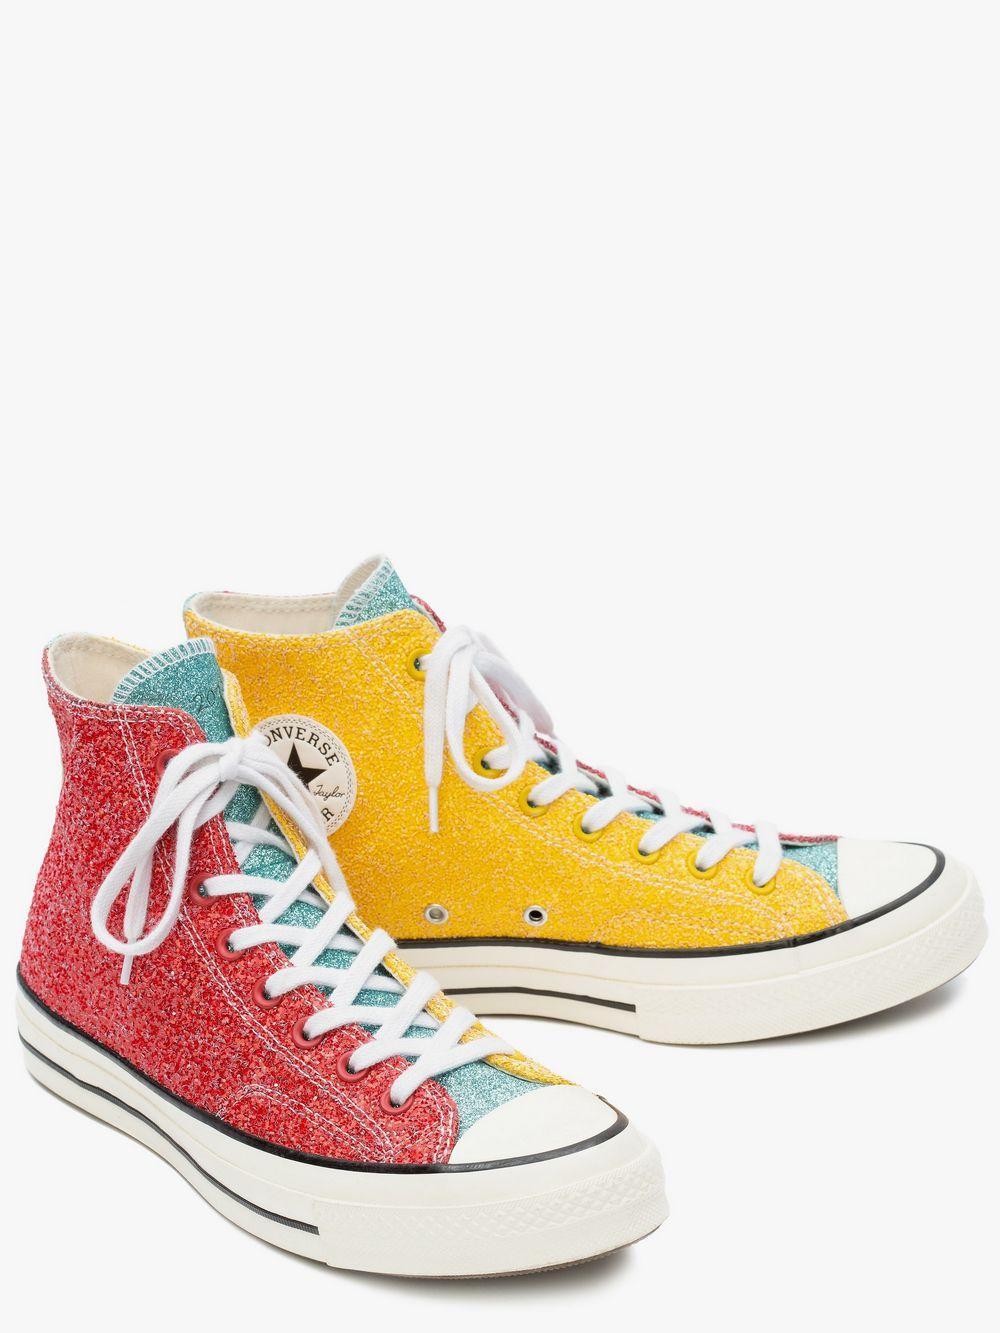 Red Yellow Converse Sale Online, 52% OFF | blountindustry.com